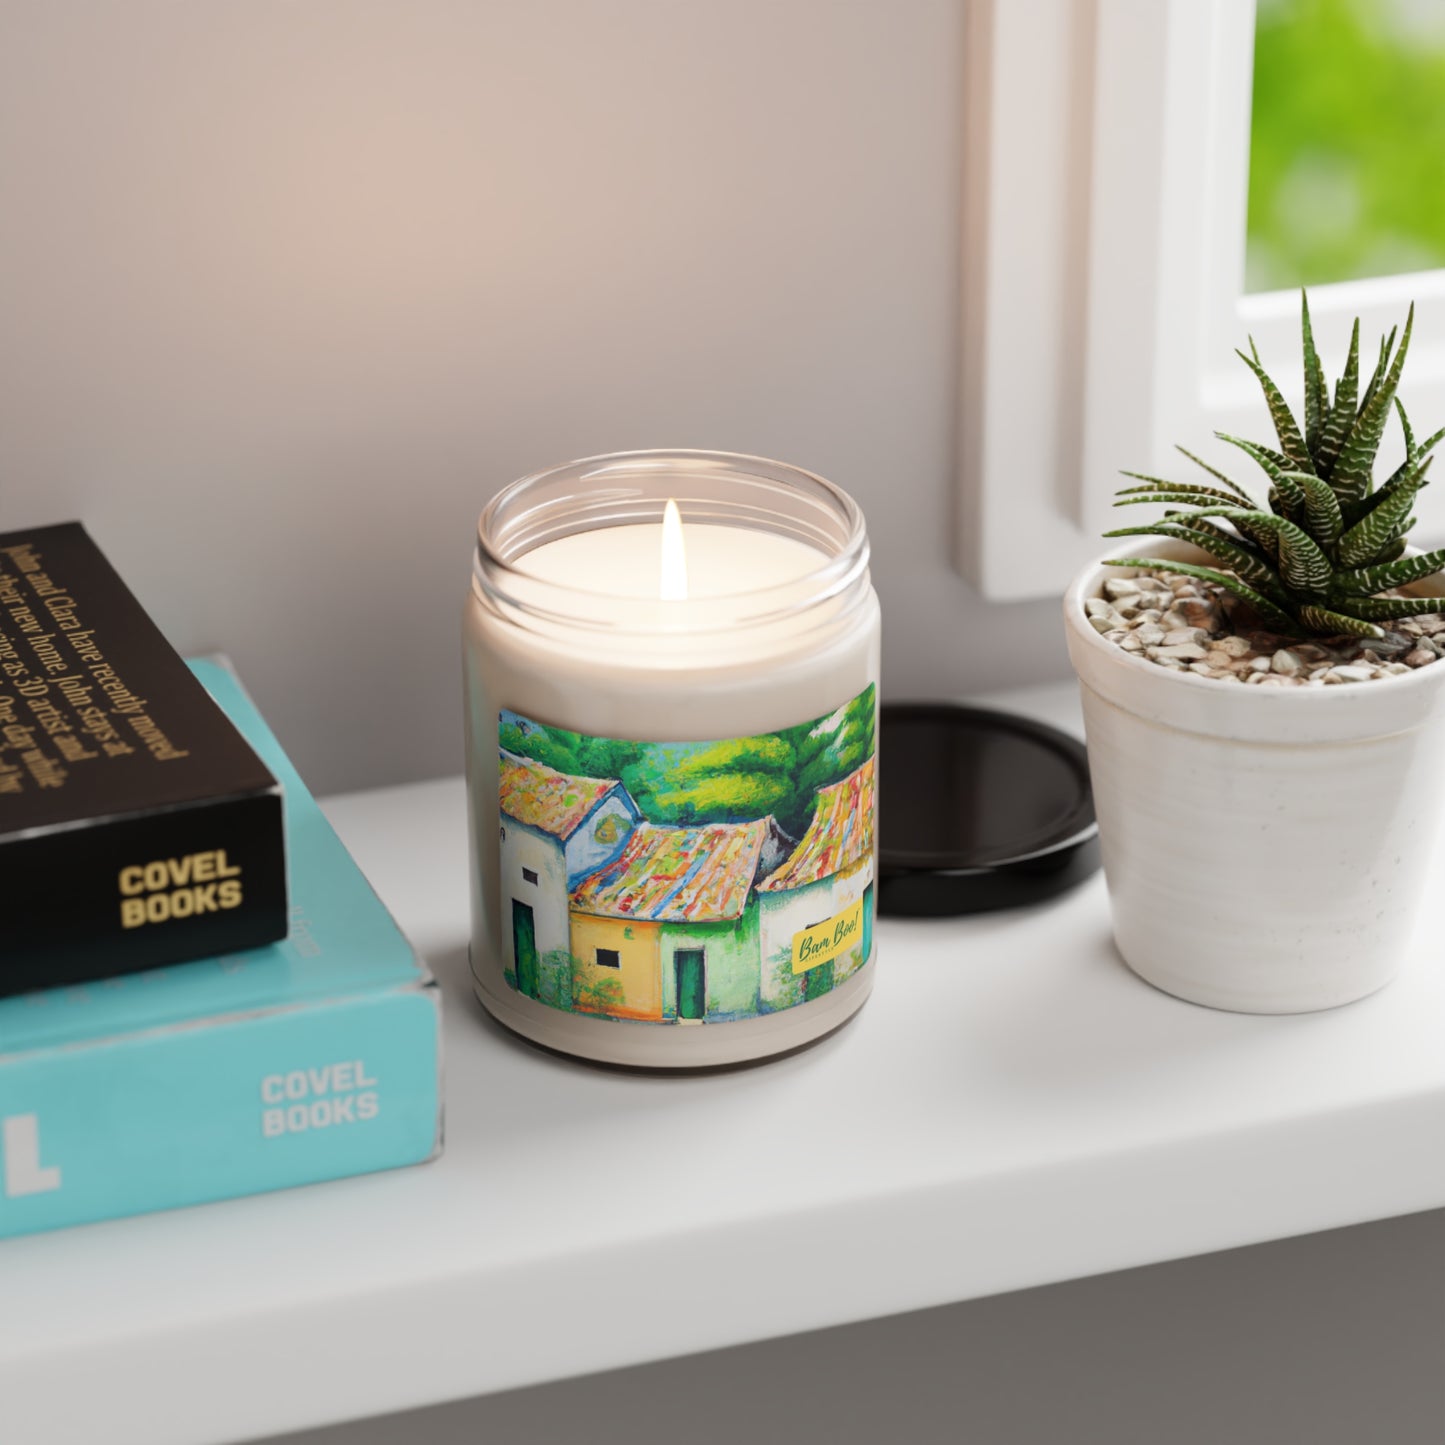 "A Feast For the Eyes: Capturing the Beauty of Nature in Oil." - Bam Boo! Lifestyle Eco-friendly Soy Candle